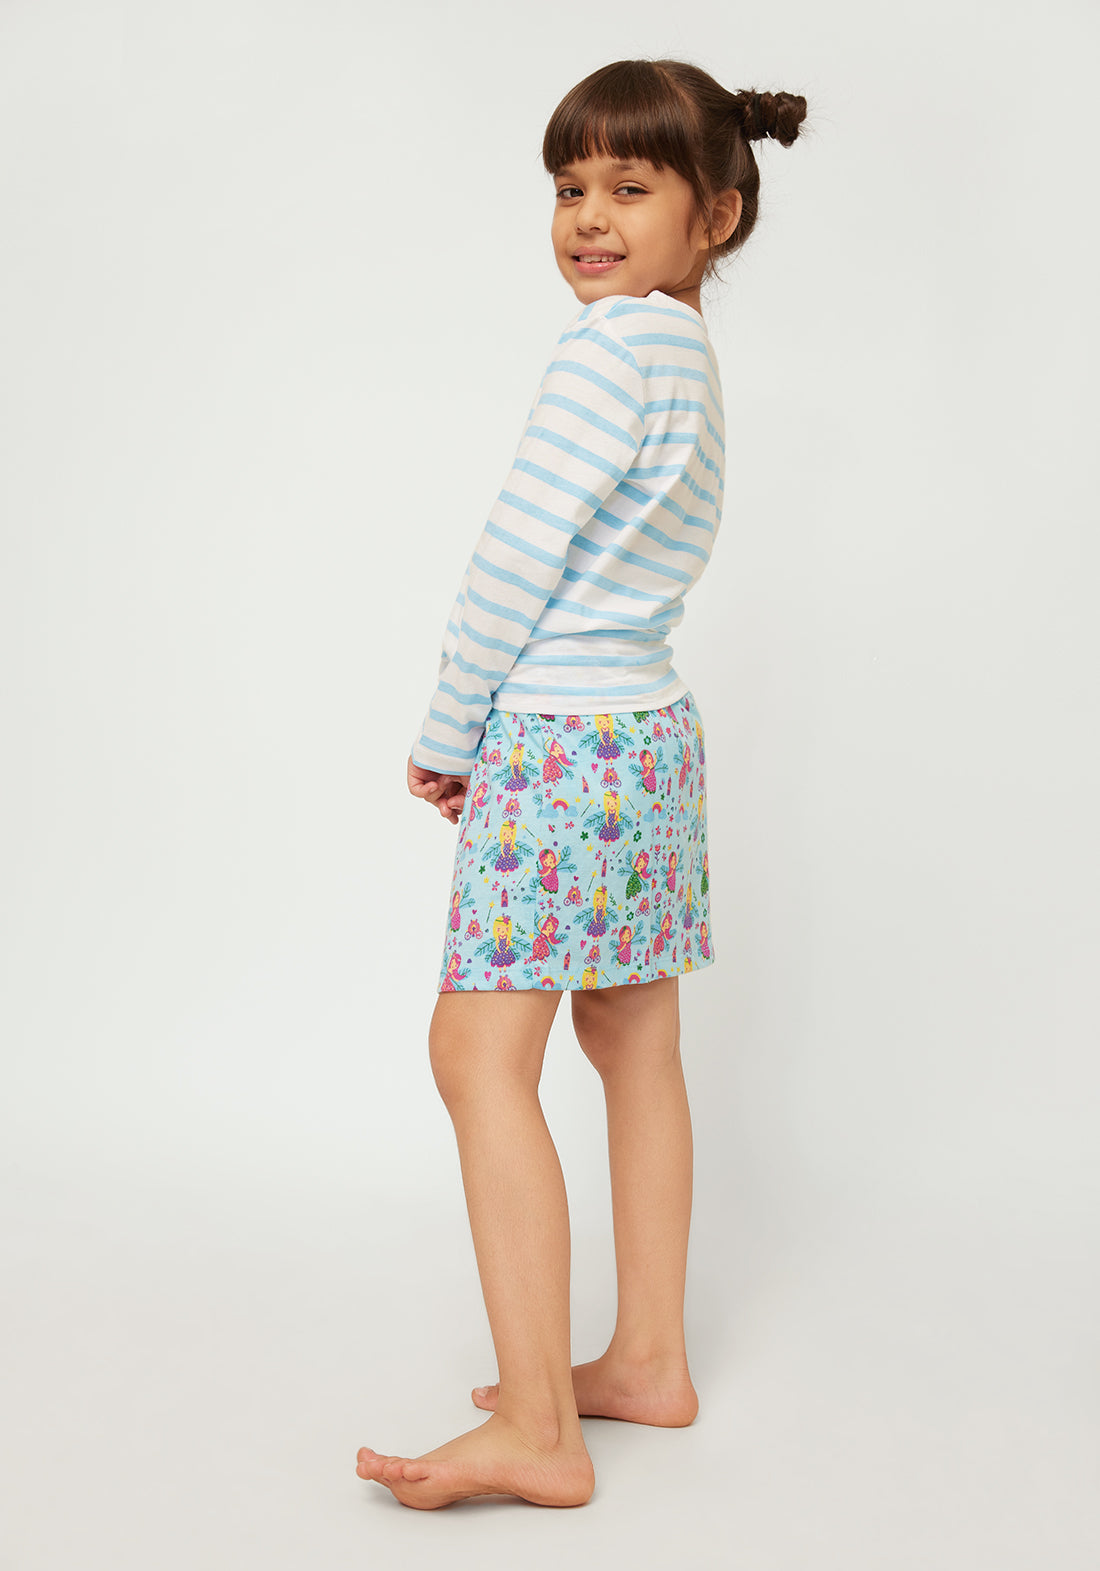 Stripe T-shirt with Multicolor Fairies Printed skirt co-ord Set